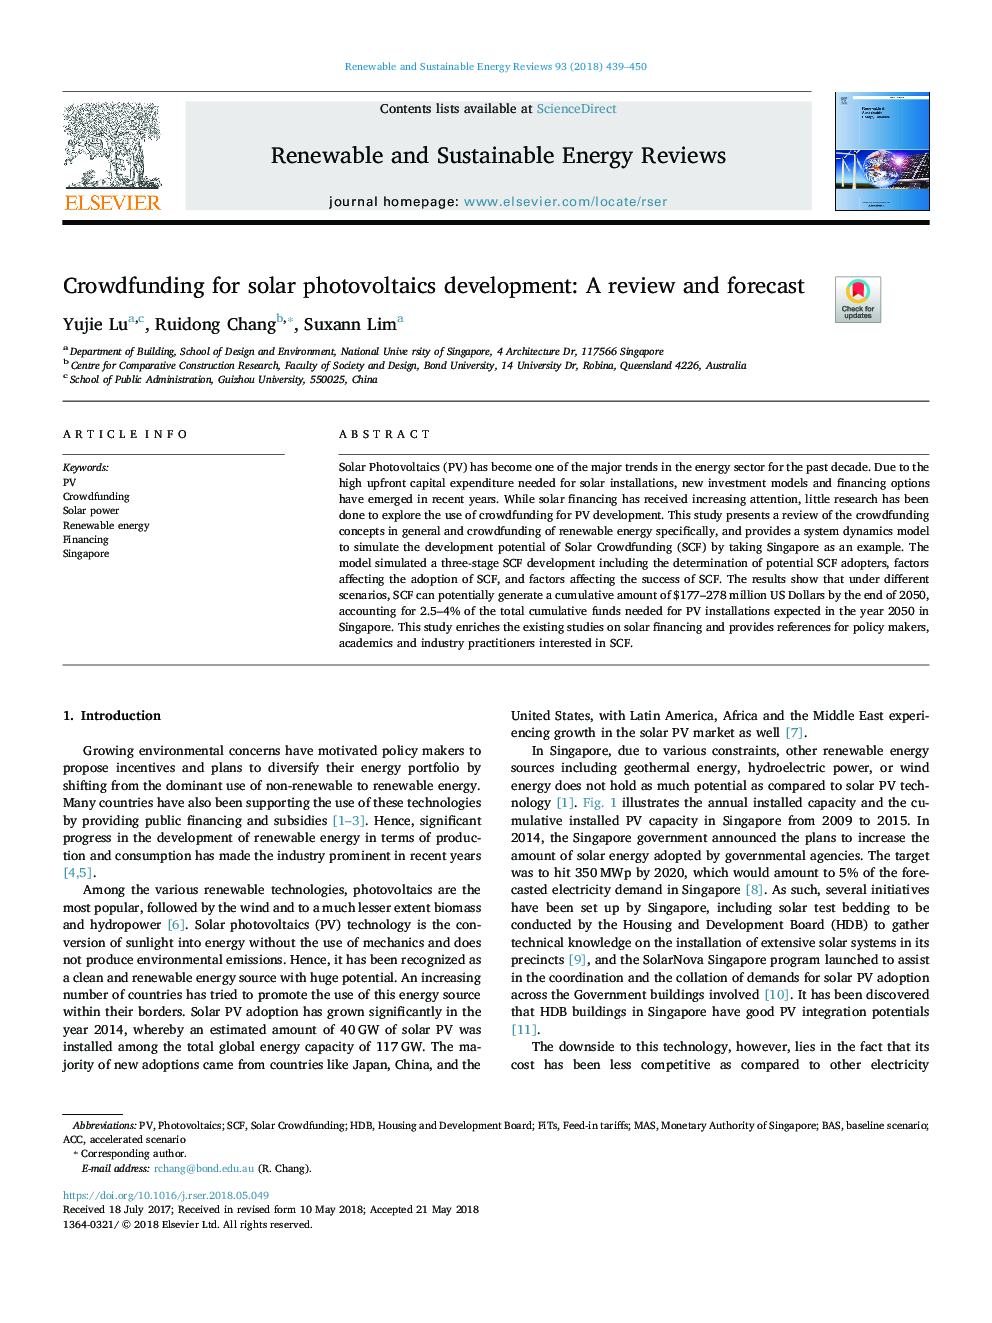 Crowdfunding for solar photovoltaics development: A review and forecast